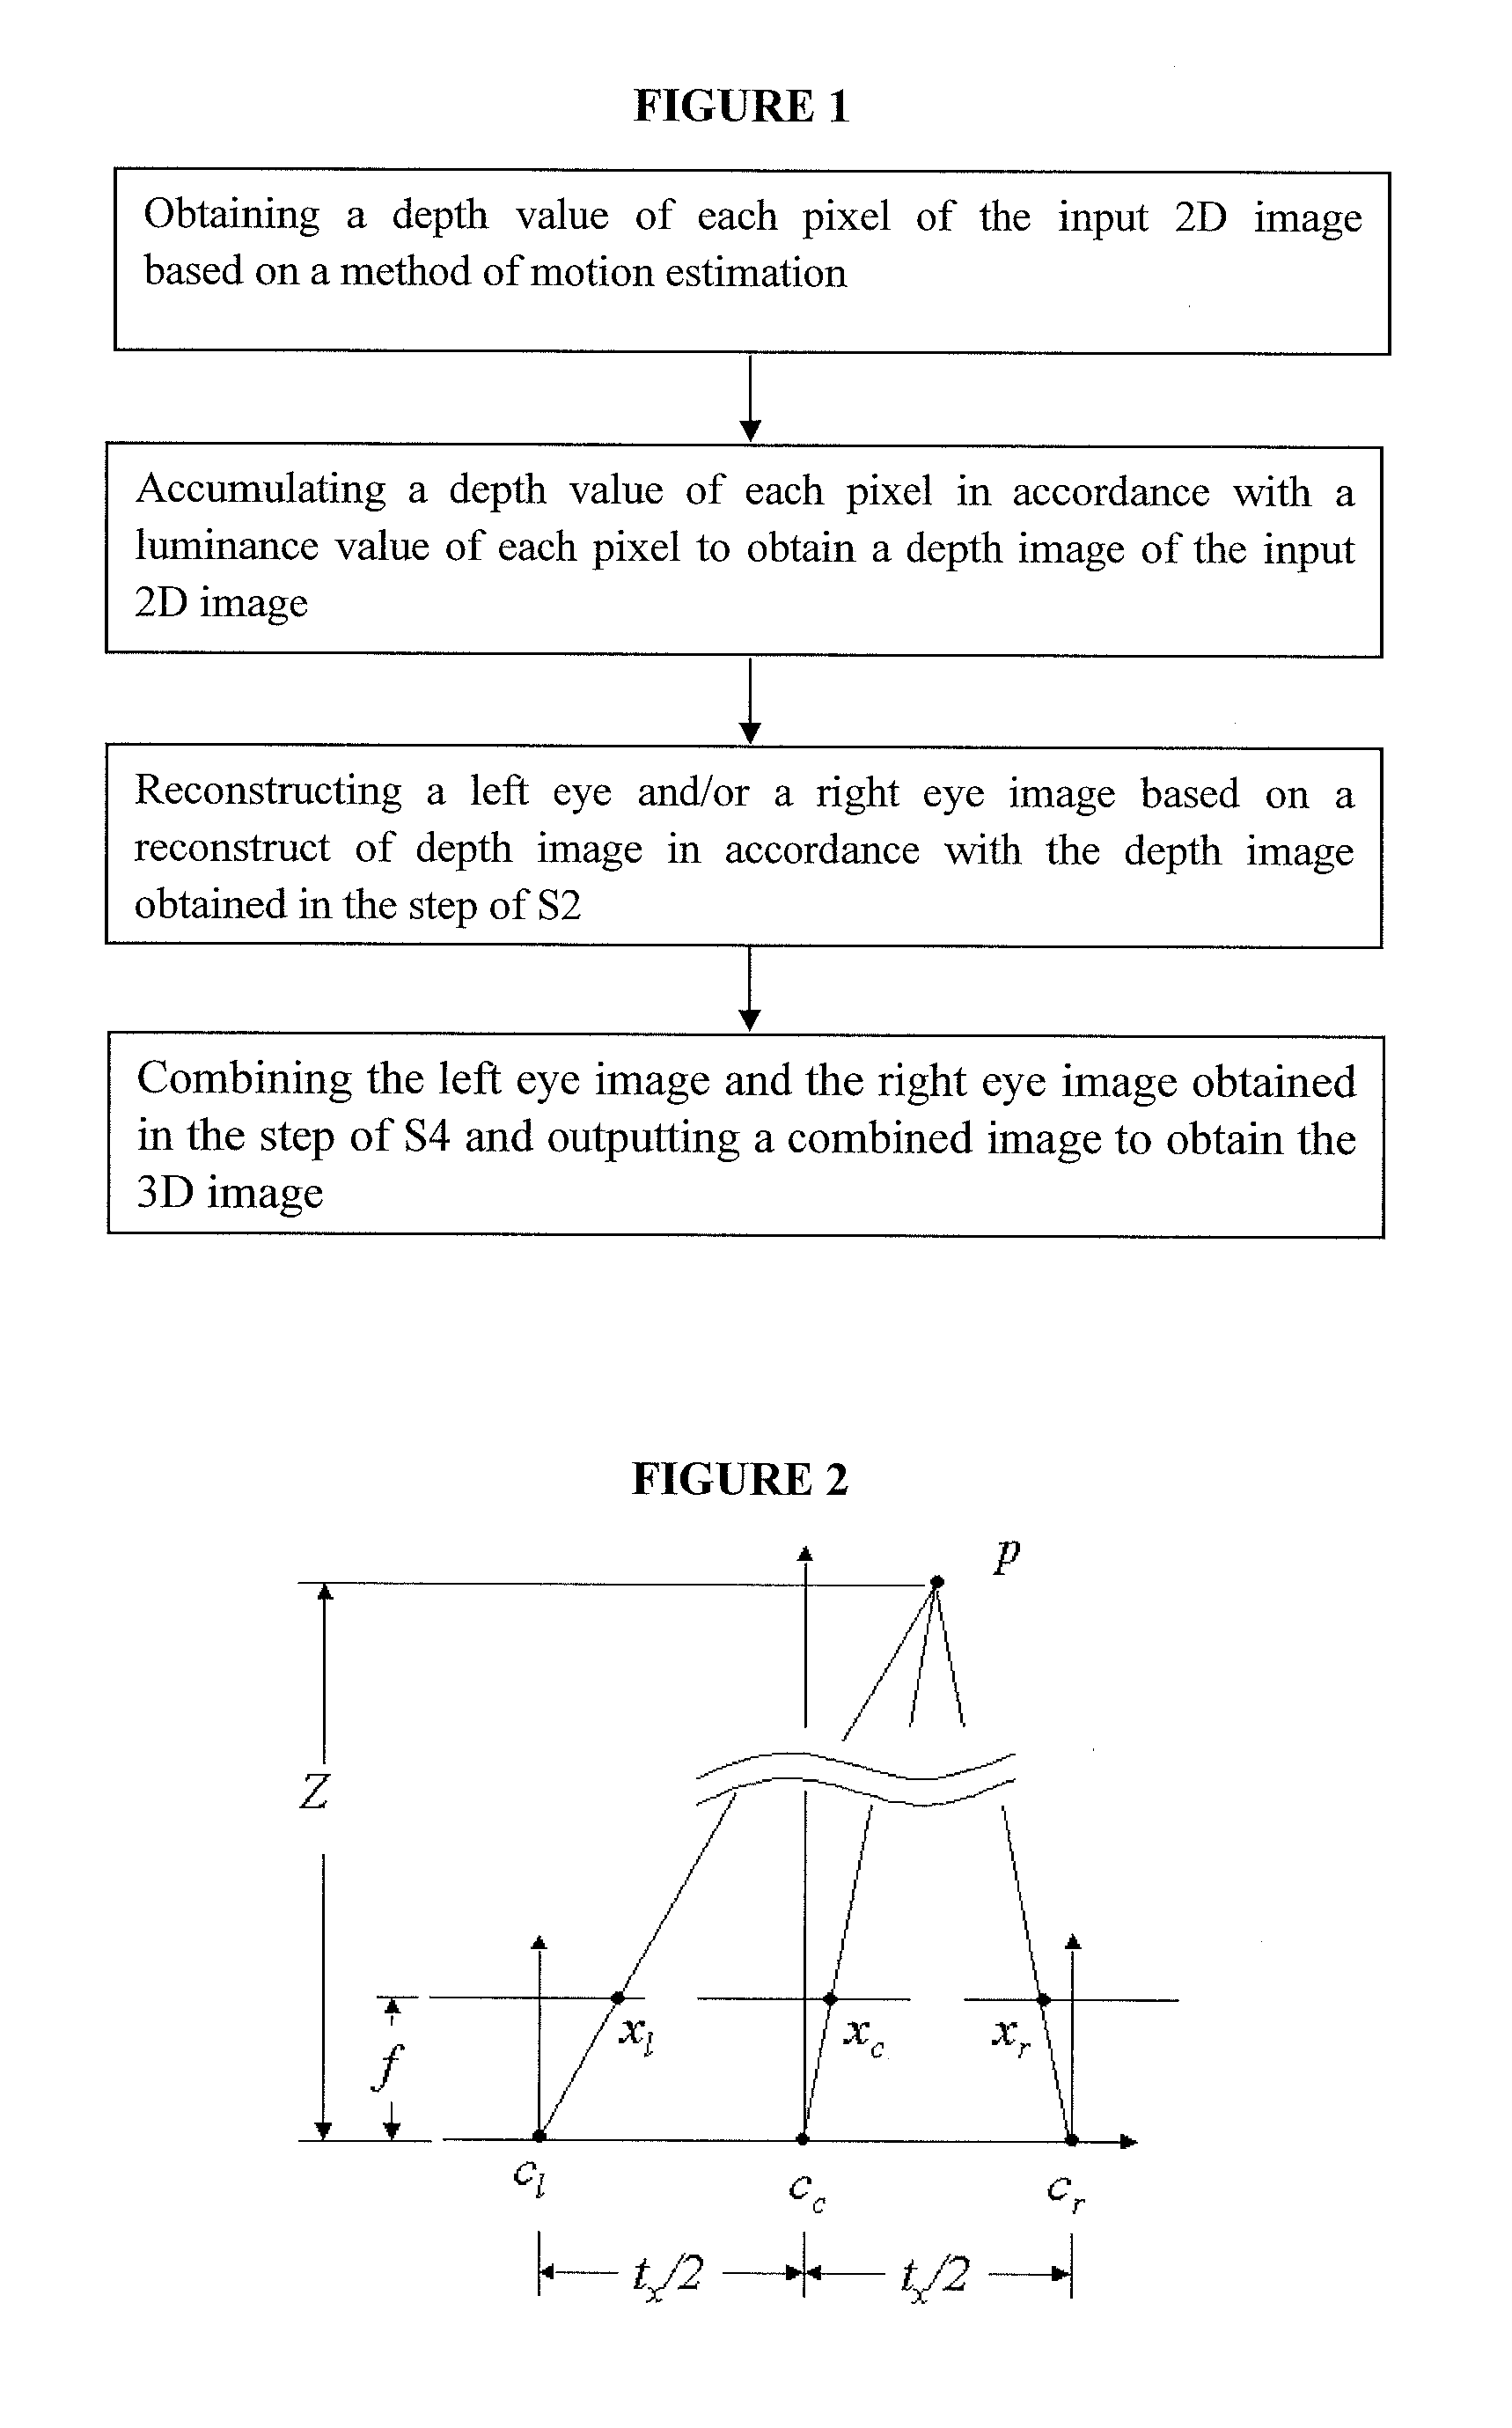 Method of converting 2d into 3D based on image motion information